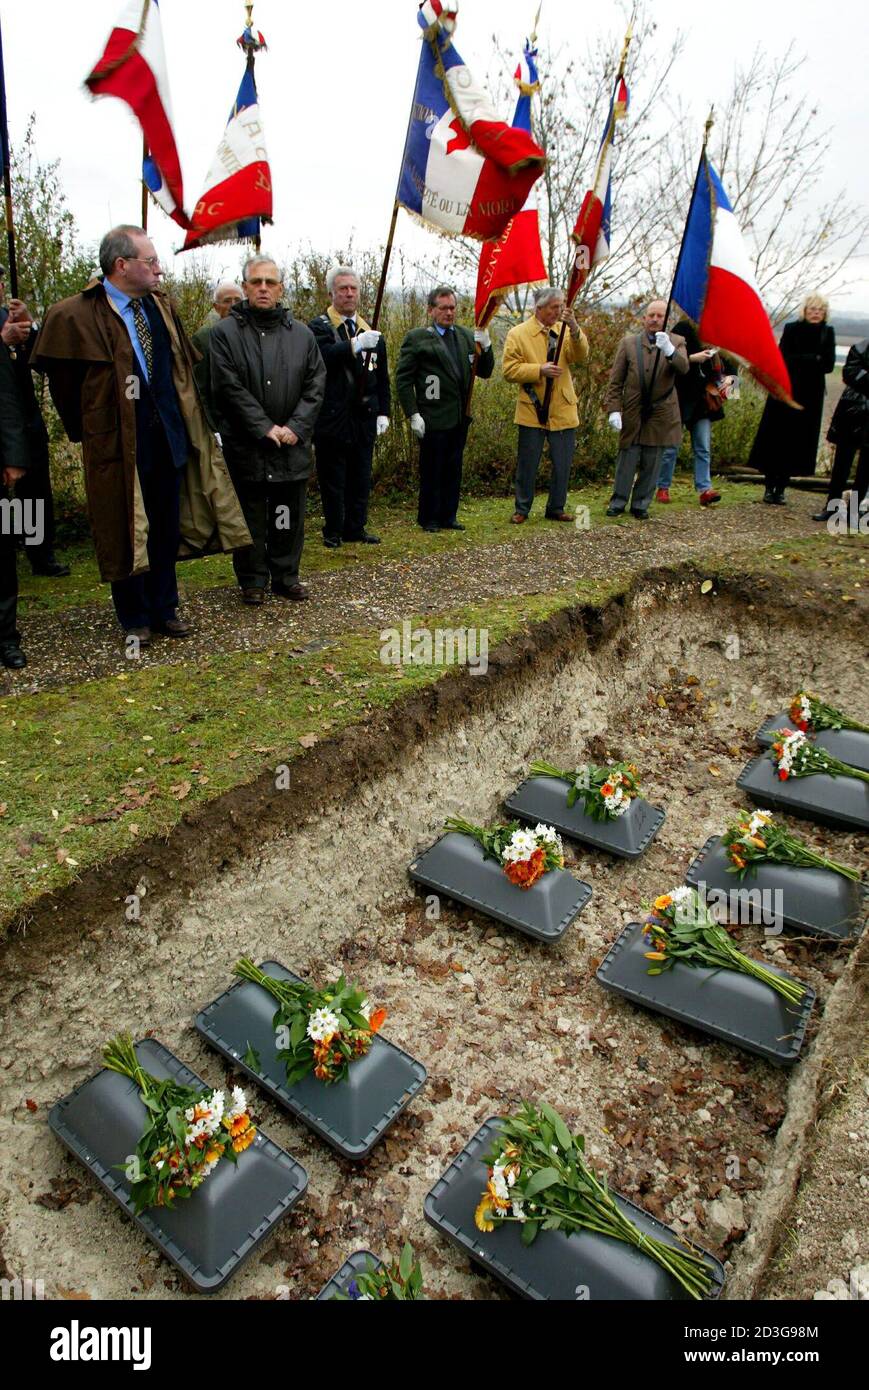 French veterans assist in a ceremony to bury the remains of 17 German soldiers shot at the end of WWII in a field in Saint Julien de Cremps, south western France November 16, 2003. The remains of the soldiers, executed by French resistance militiamen, were unearthed and are to be given proper burials during a ceremony at the German military cemetary in Berneuil. REUTERS/Regis Duvignau  RD Stock Photo